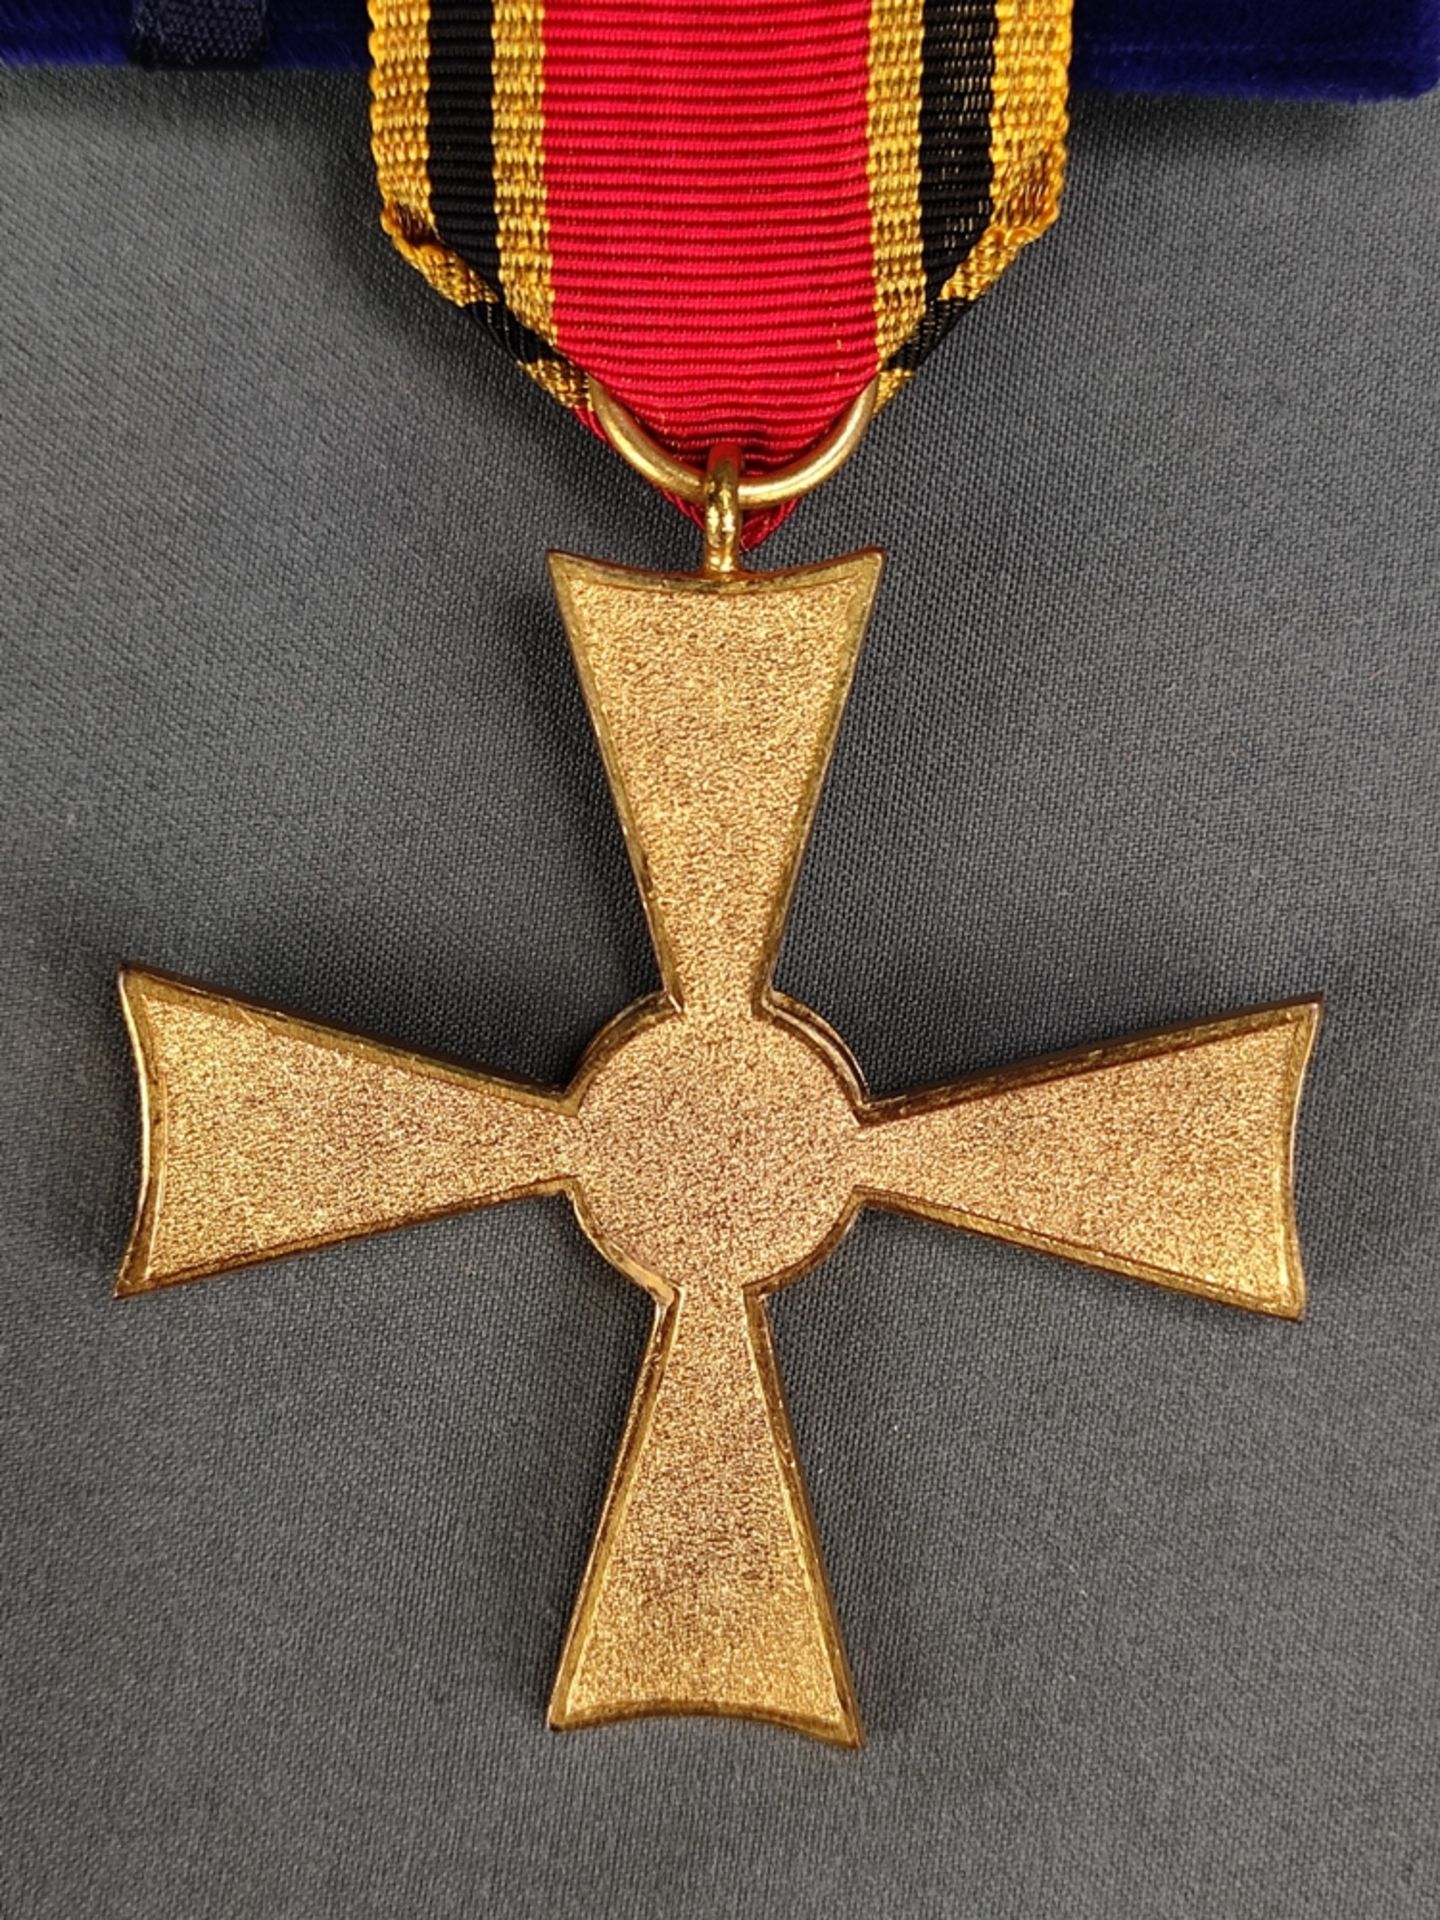 Federal Cross of Merit, in case, presented to Otto Müller on 13.11.61 for his services in the - Image 2 of 2